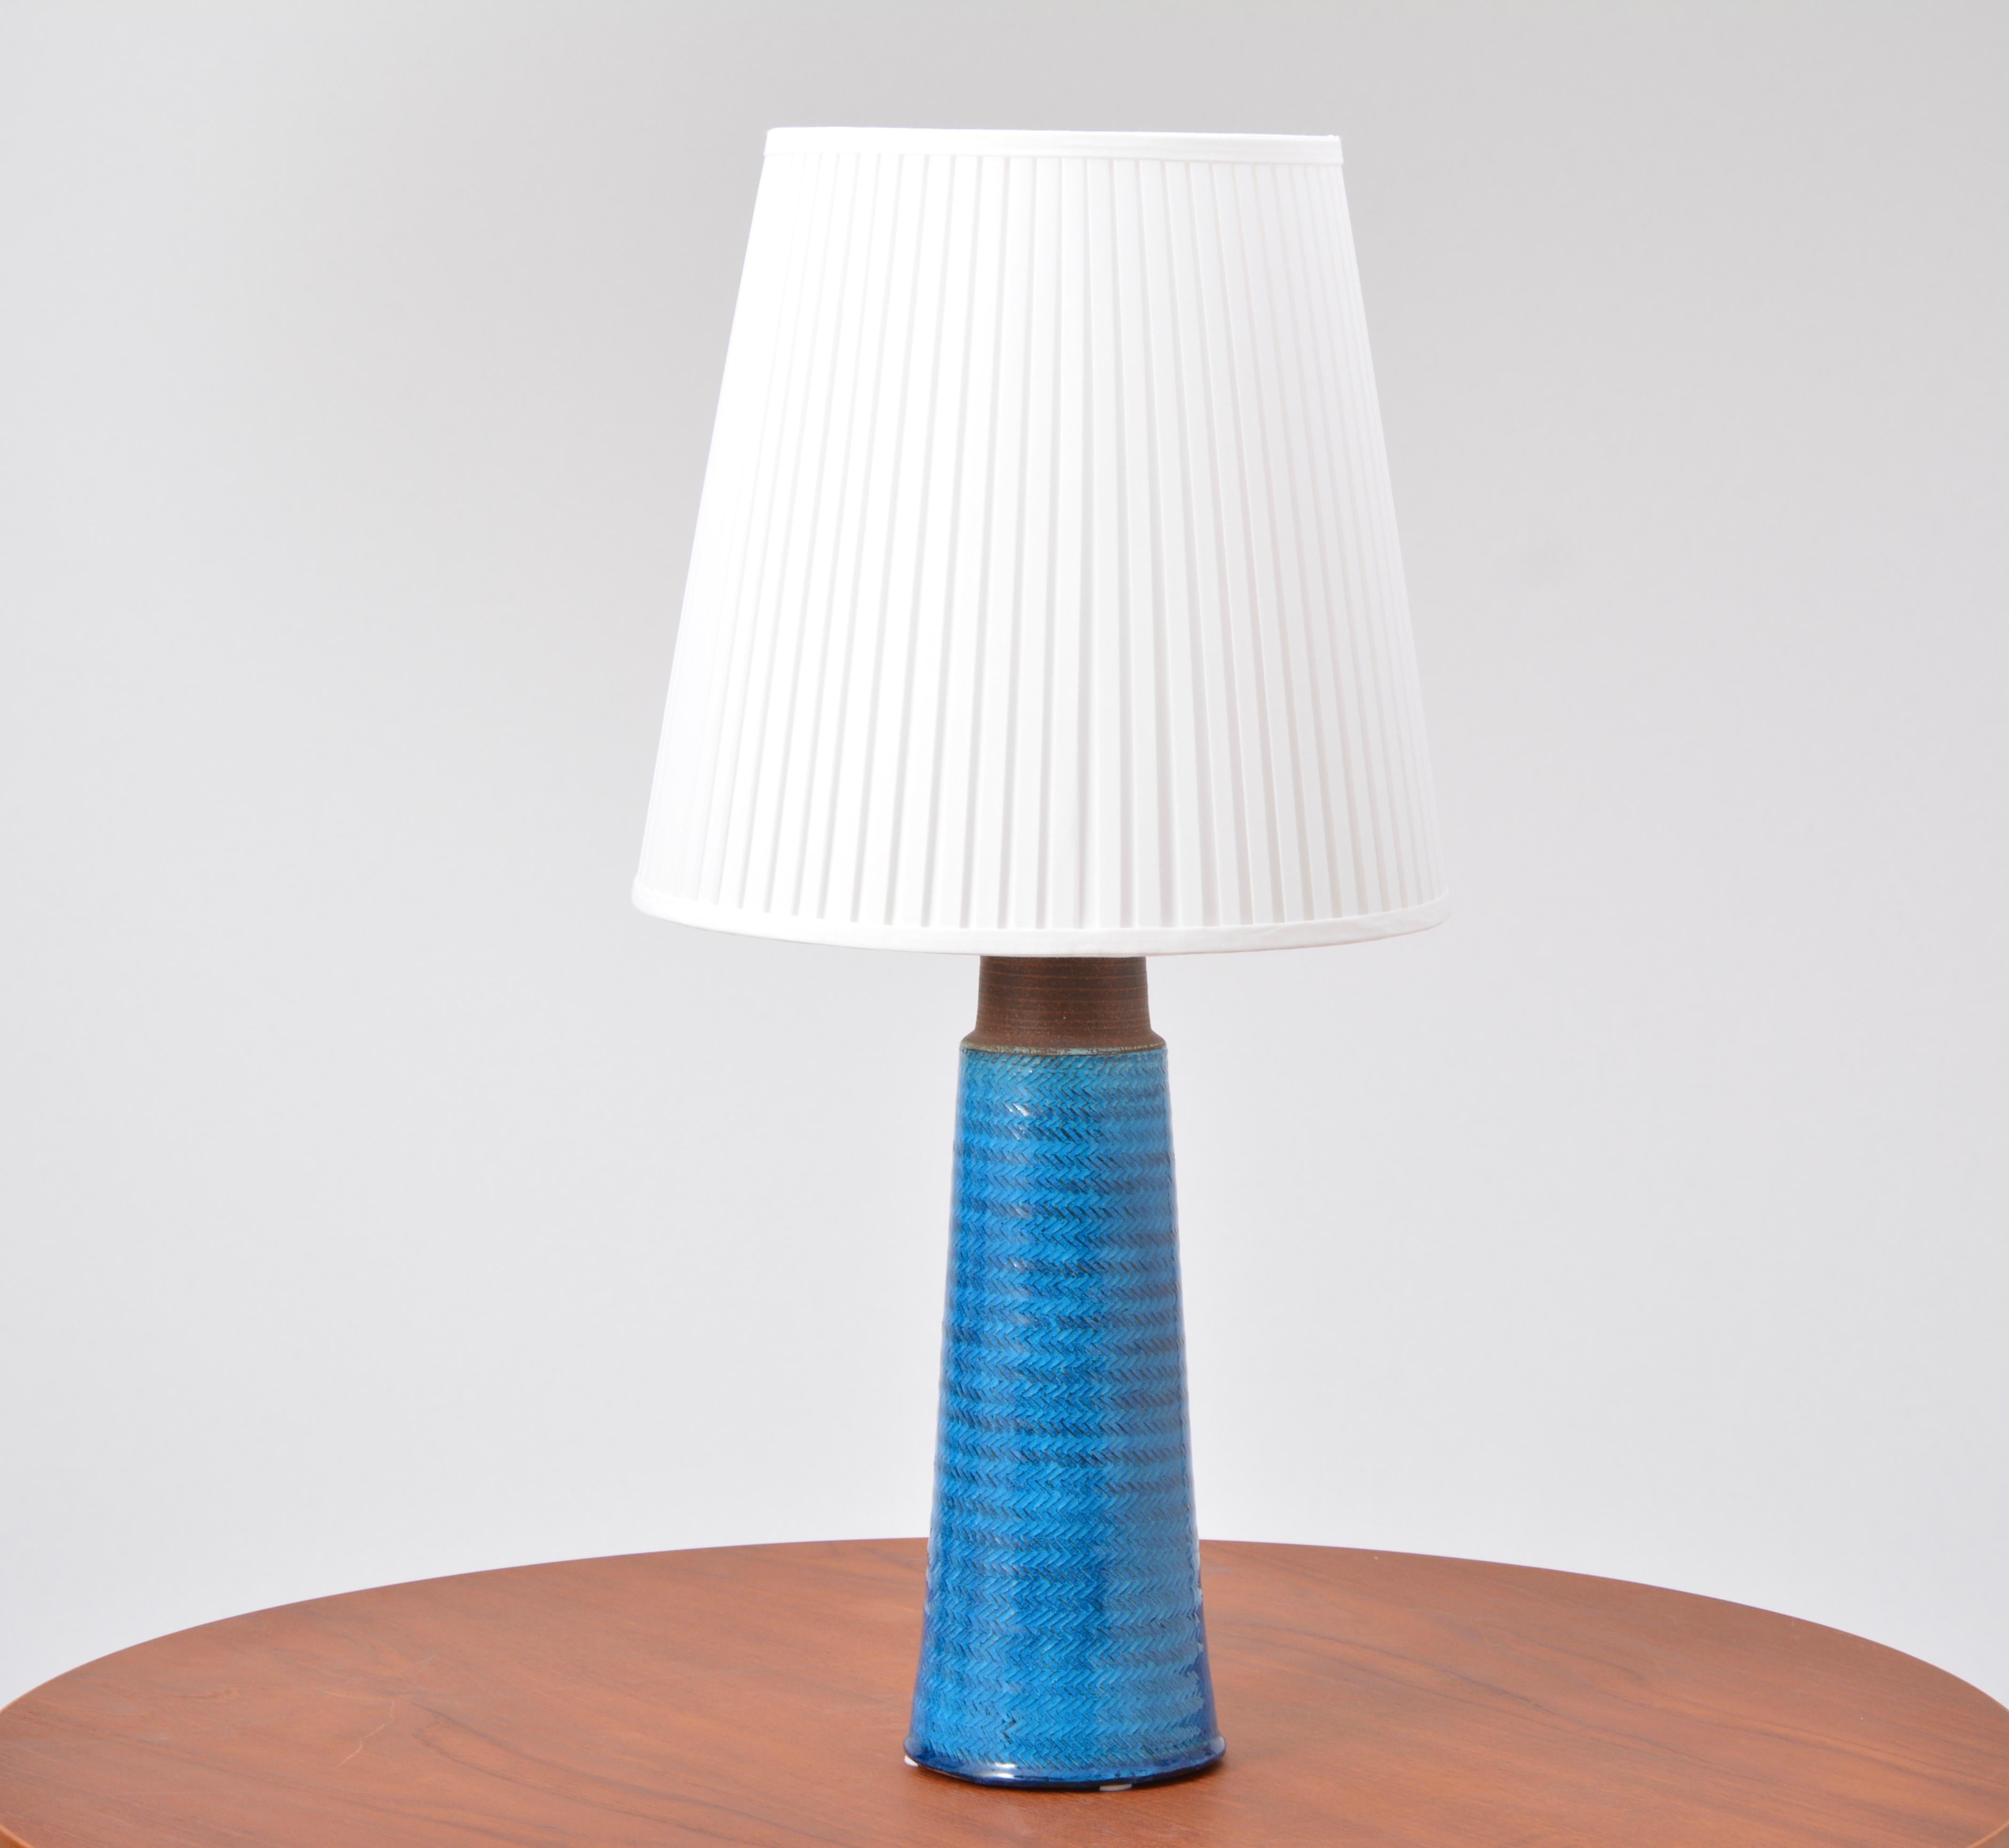 Large Turquoise Danish Mid-Century Modern Stoneware table lamp by Nils Kähler

This stoneware table lamp was designed by Nils Kähler and made in the 1960s by Herman A Kähler Ceramic (HAK) in Denmark. It has a turqouise colored glaze covering. The